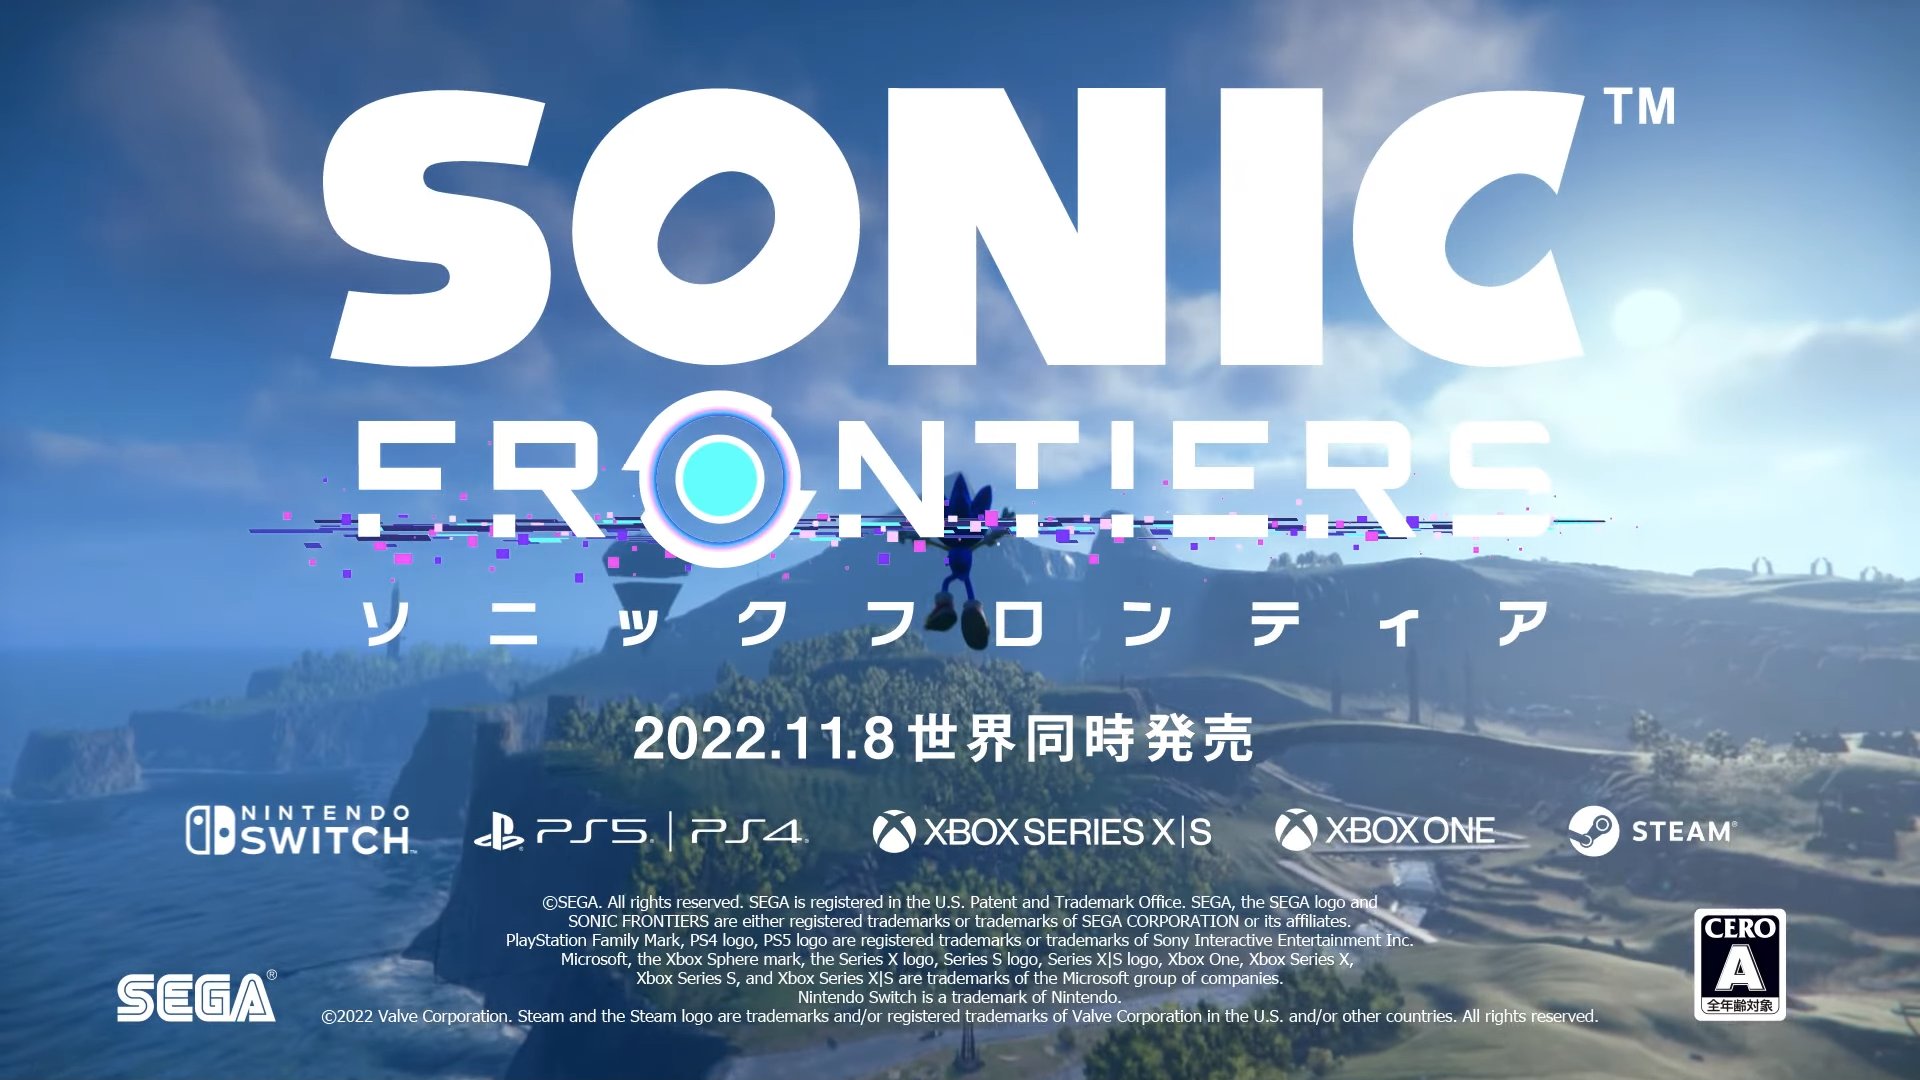 New Sonic Game Leaked As Early As August 2020, Reveals Open World